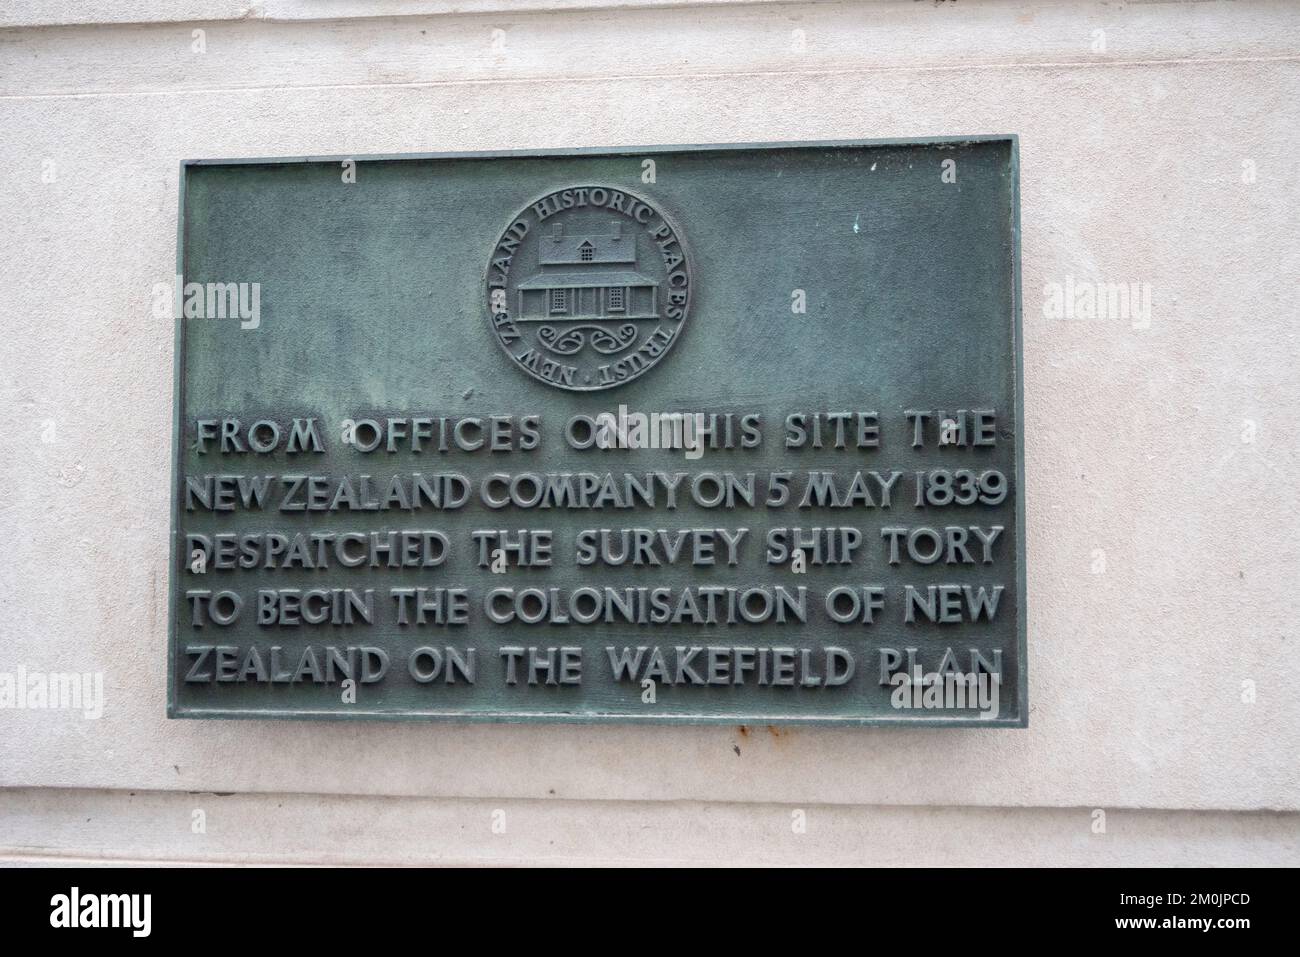 New Zealand Historic Places Trust plaque, Adam Street, London. From offices on this site the New Zealand Co despatched colony ship on Wakefield Plan Stock Photo